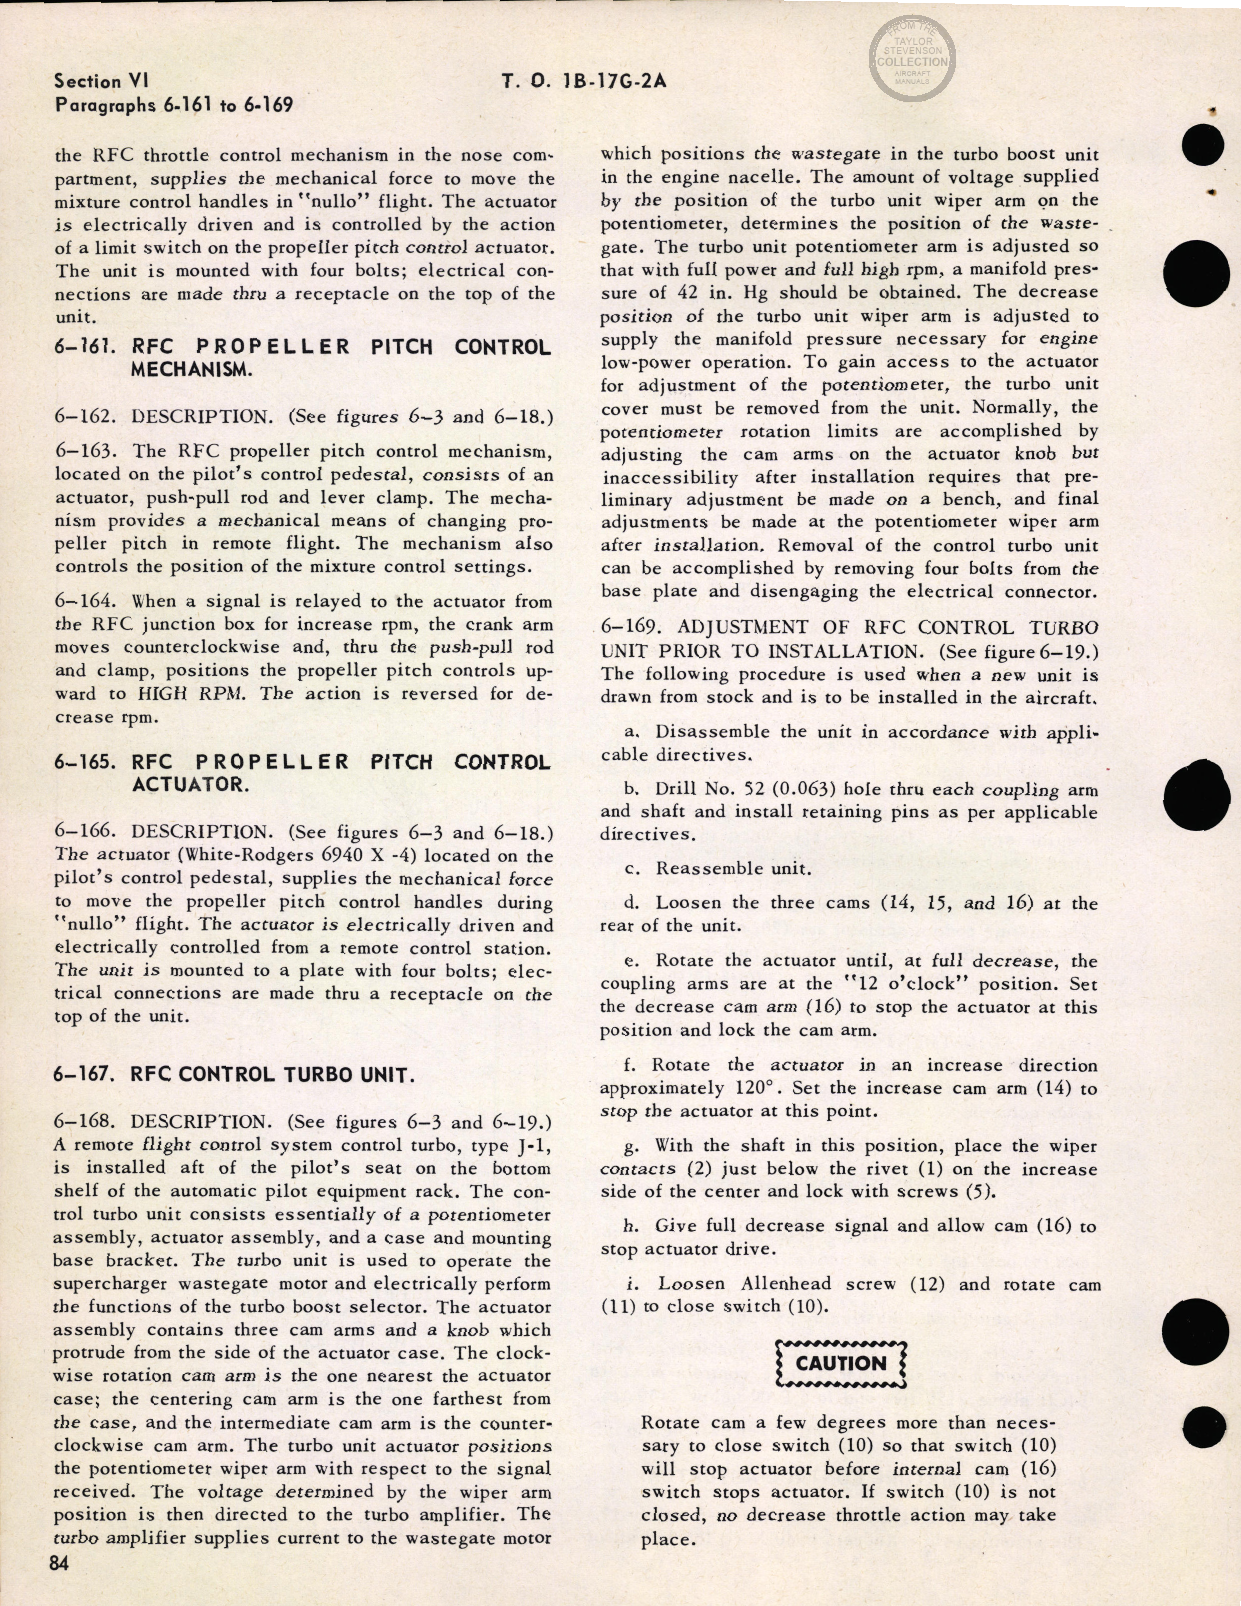 Sample page 90 from AirCorps Library document: Supplemental Handbook Maintenance Instructions - QB-17